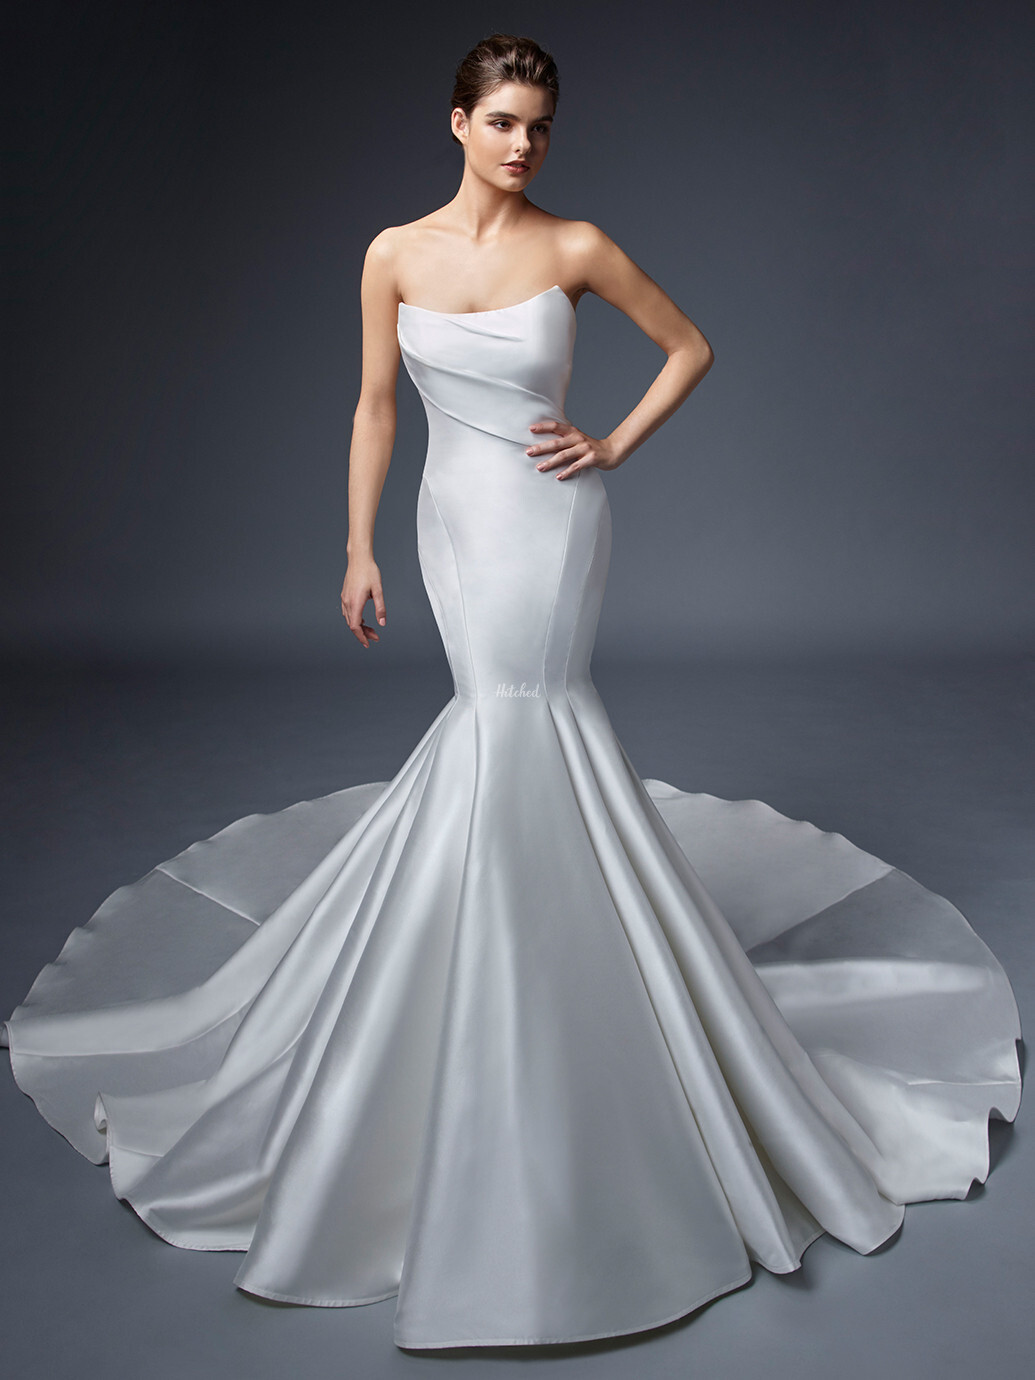 Seraphine Wedding Dress from ELYSEE - hitched.co.uk